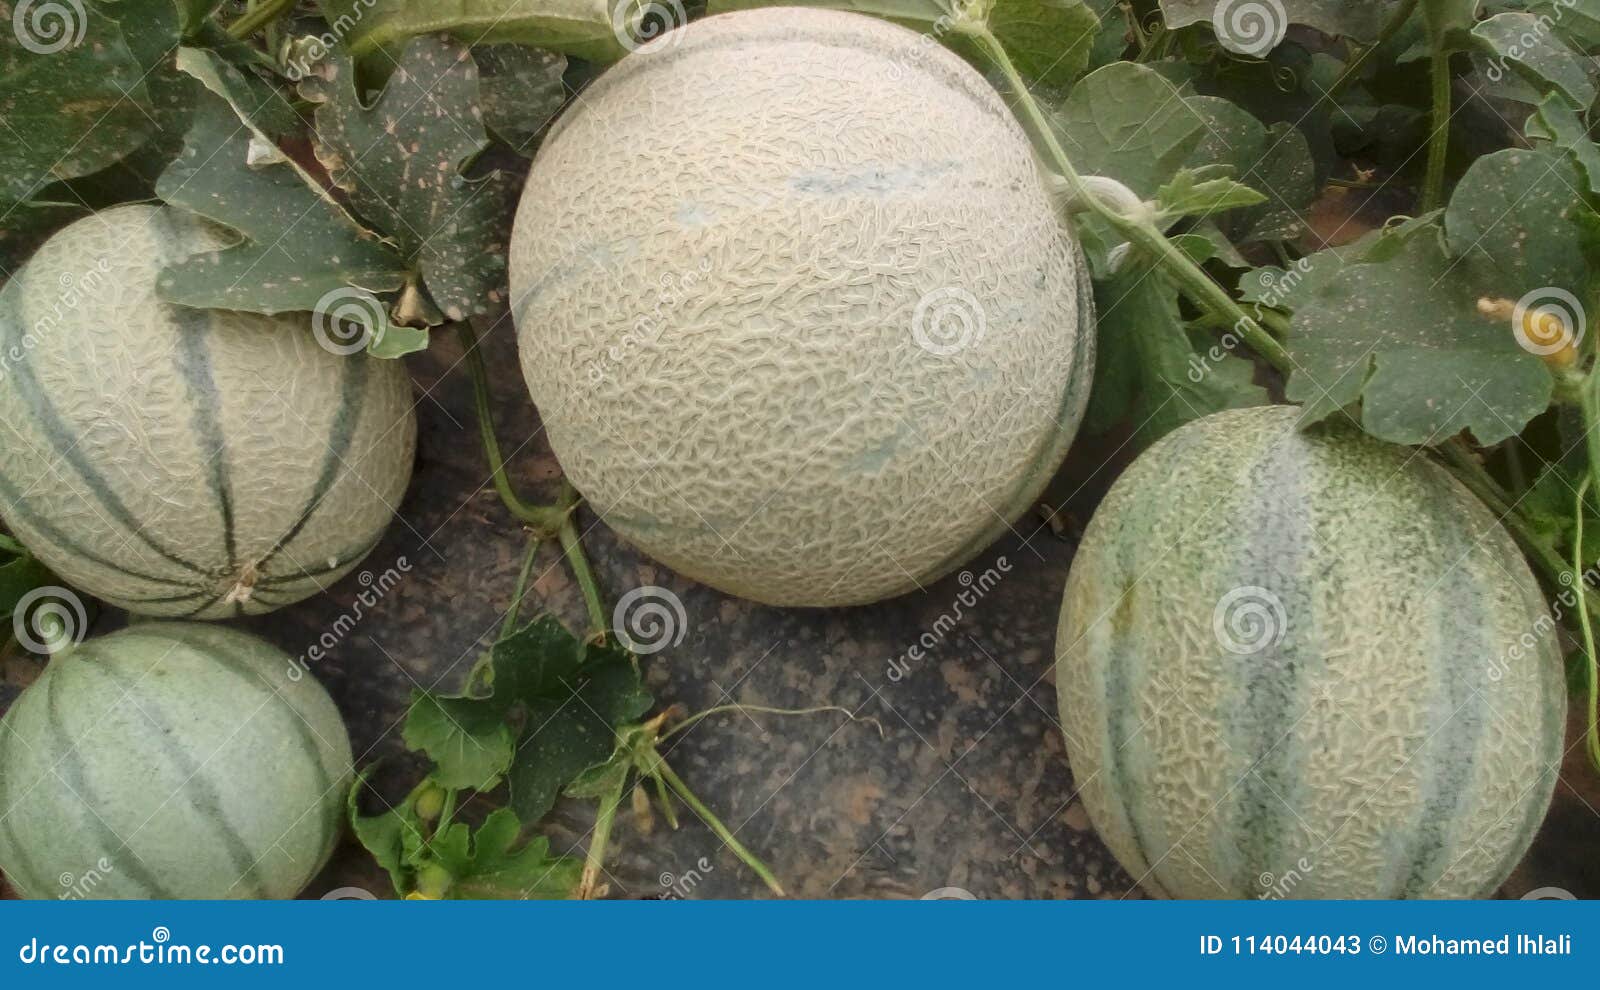 melons in morrocco